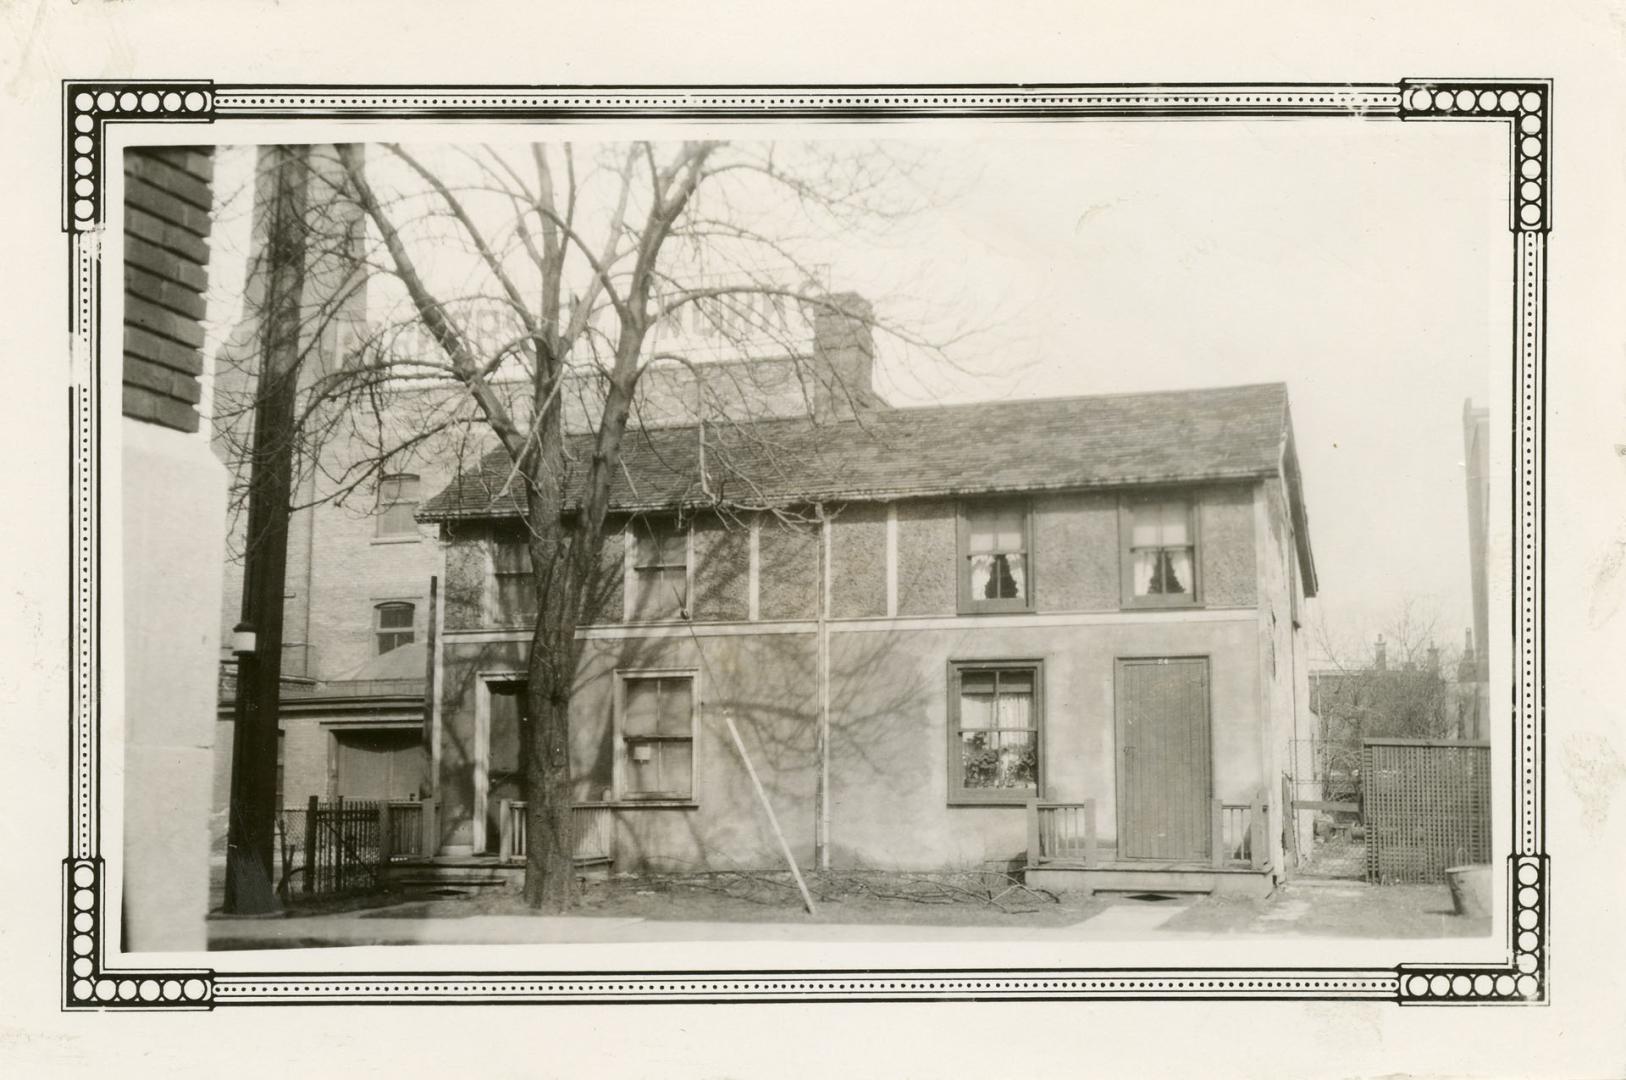 Crown, William, houses, 22-4 Asquith Avenue, north side, between Yonge Street and Park Road